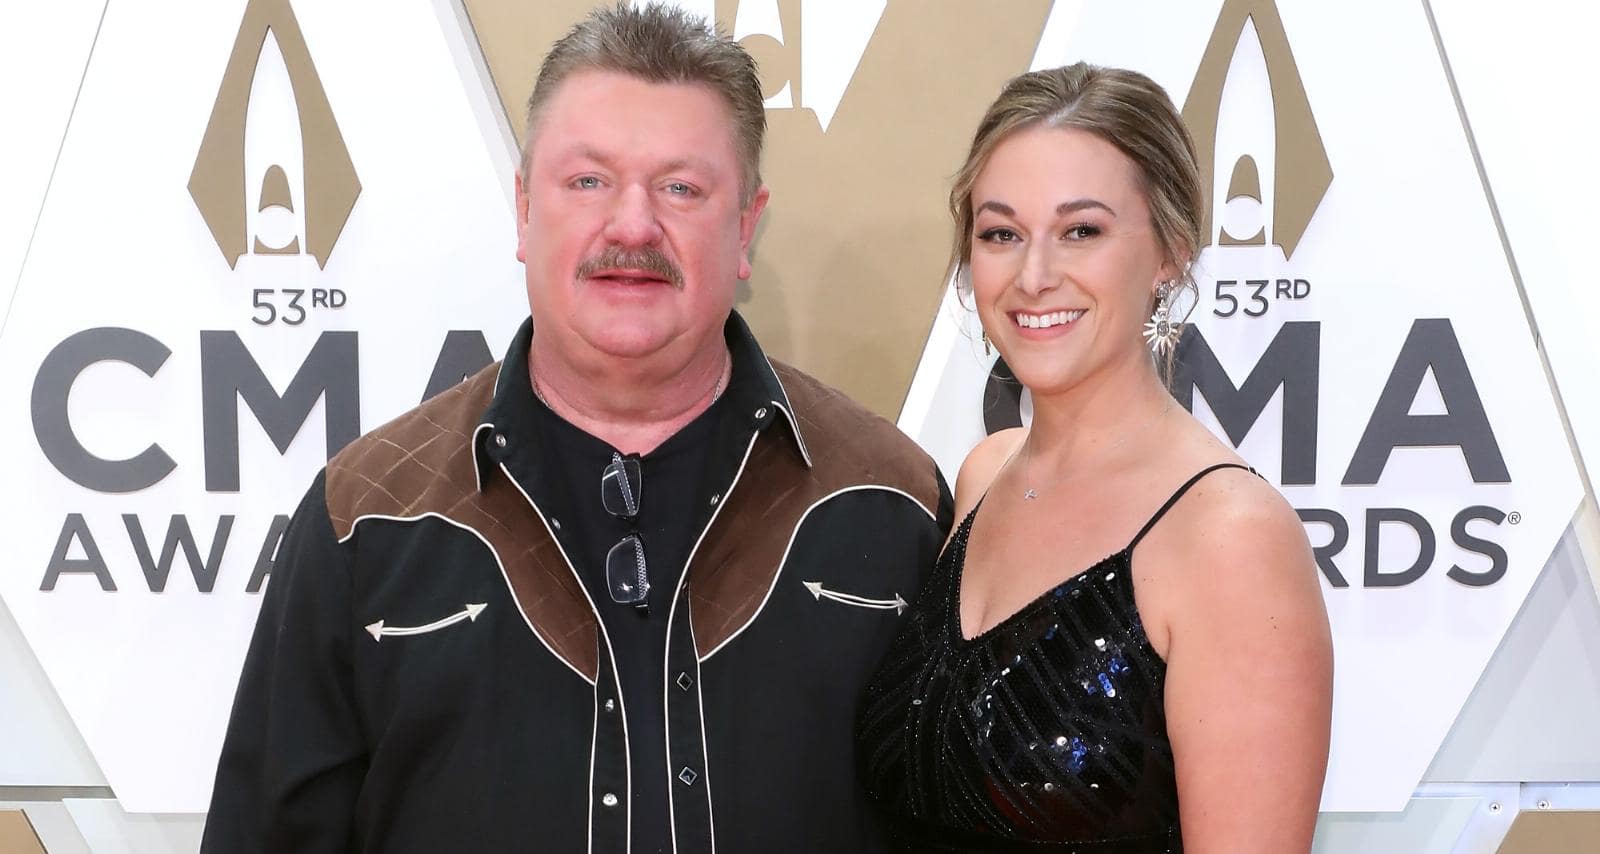 Tara Terpening Diffie Wiki, Age, Parents, Family, Kids, Wedding and Facts About Joe Diffie’s Fourth Wife